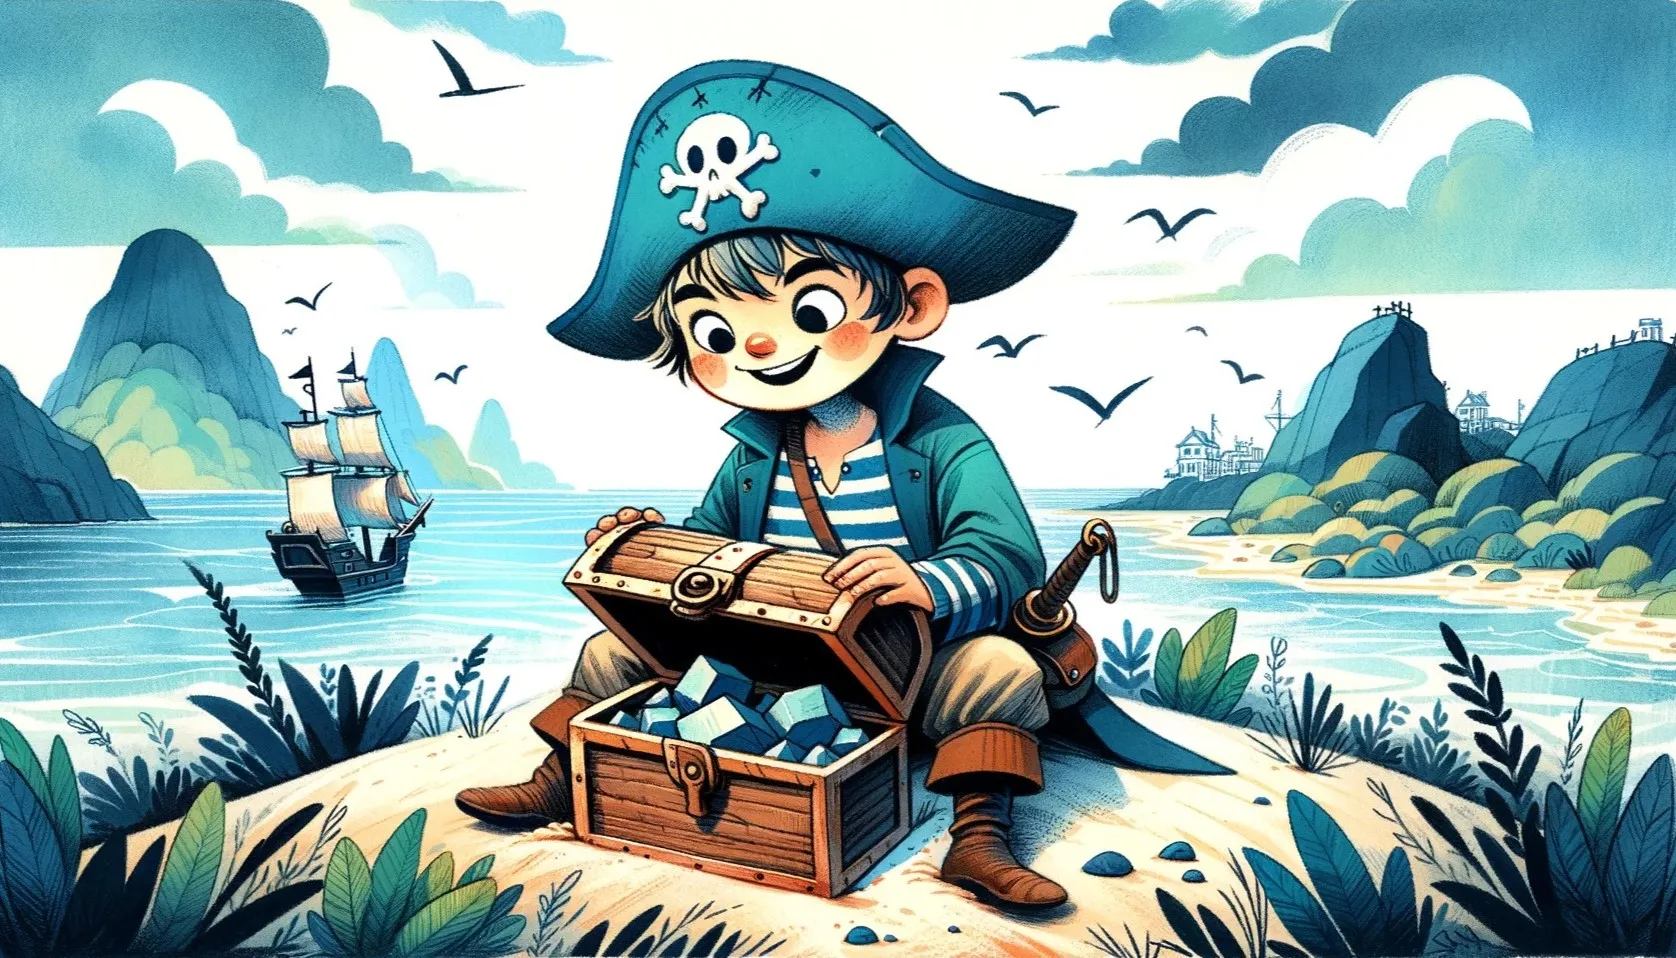 Customer research for treasure hunting pirates